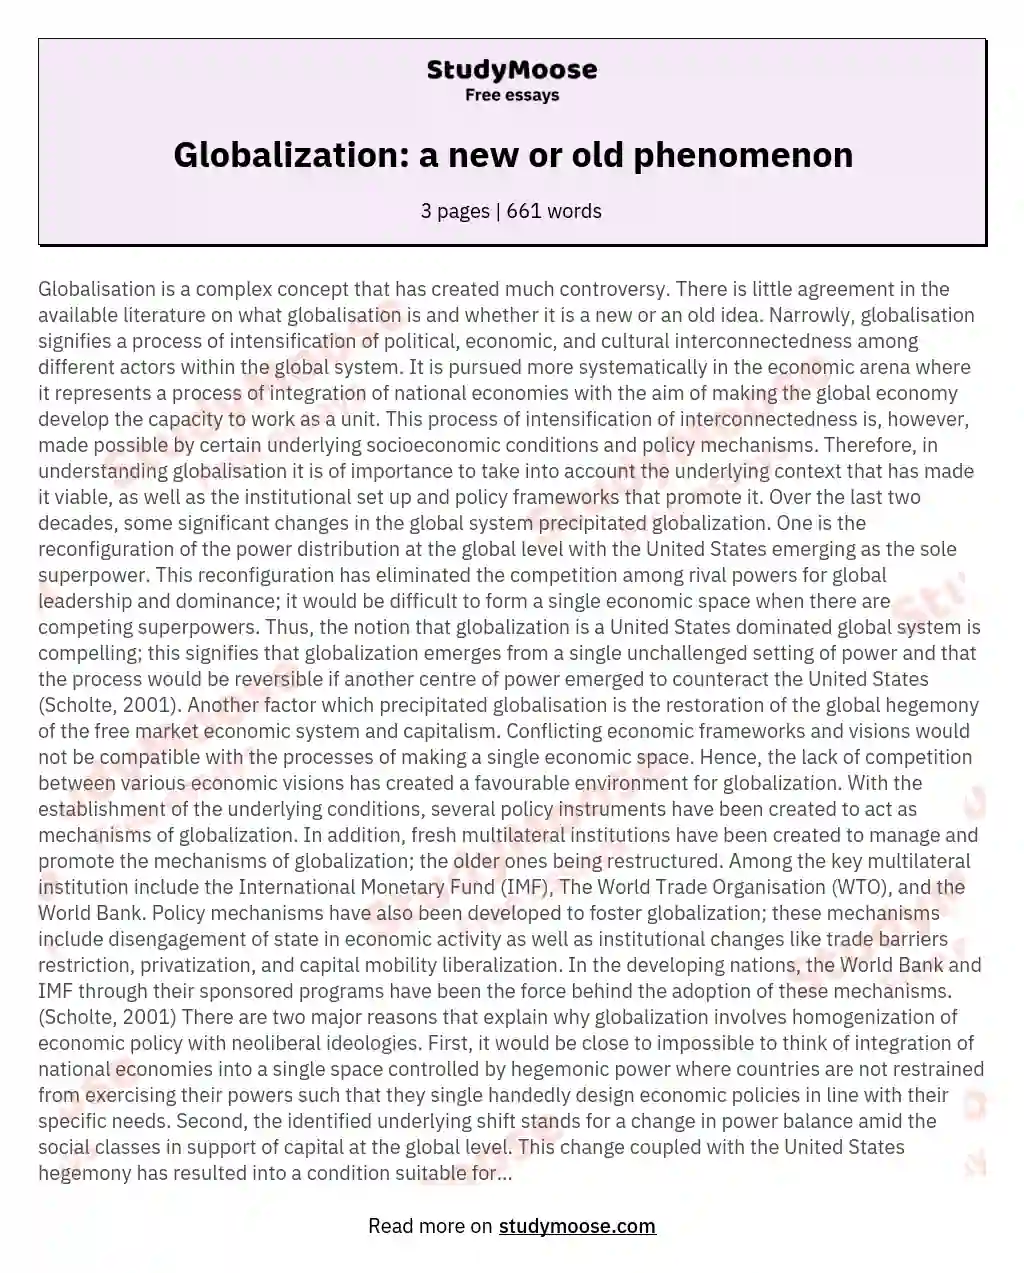 Globalization: a new or old phenomenon essay